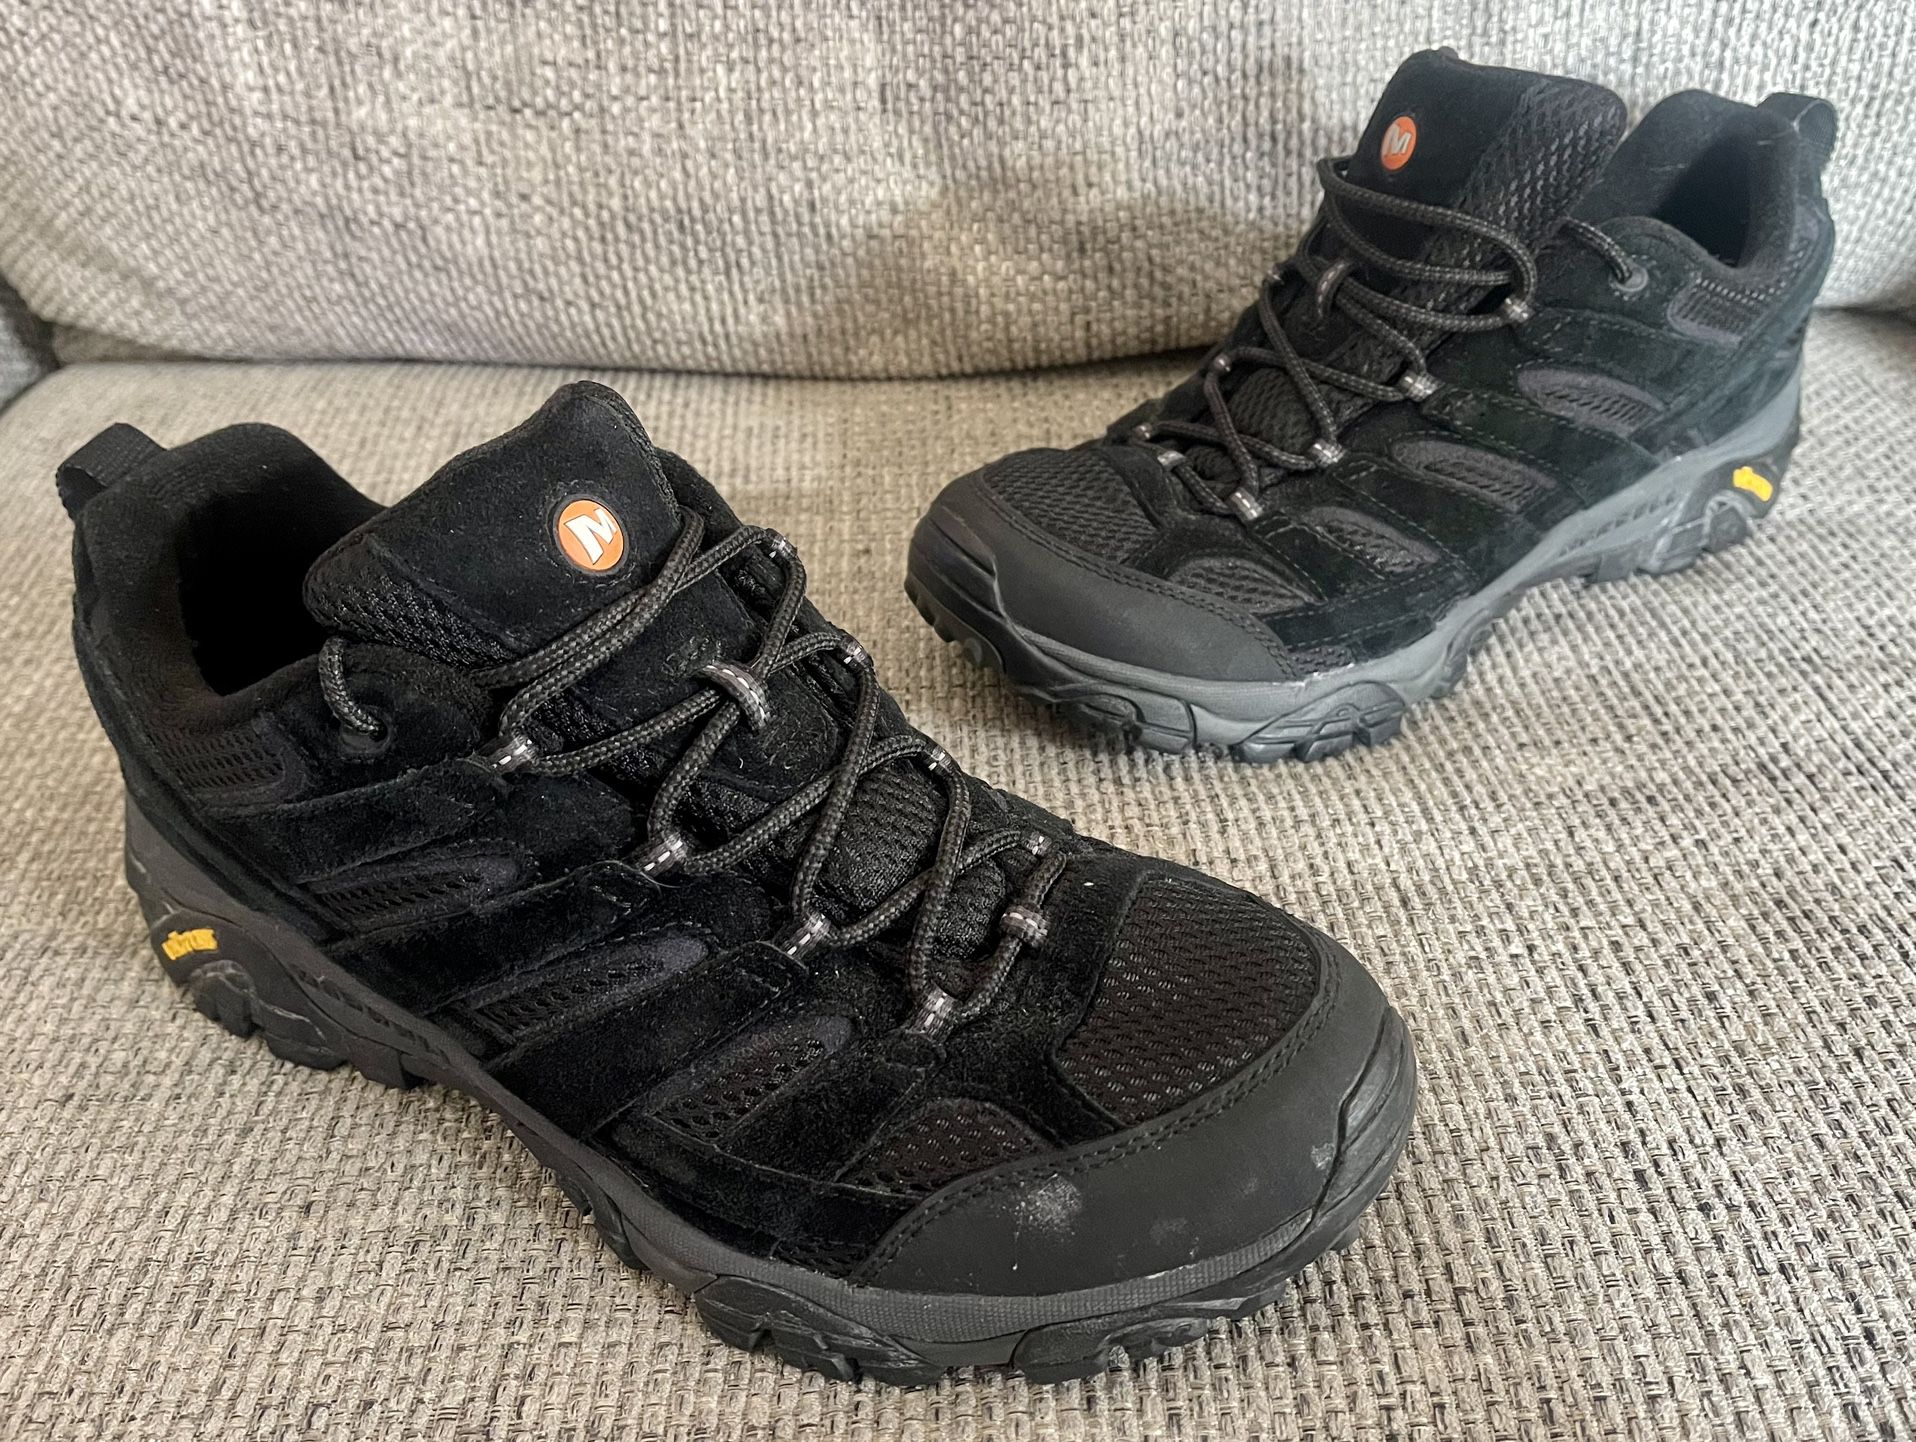 MERRELL MOAB 2 Ventilator BLACK Night Suede Hiking Shoes J06017 11.5 for Sale in Fresno, CA - OfferUp